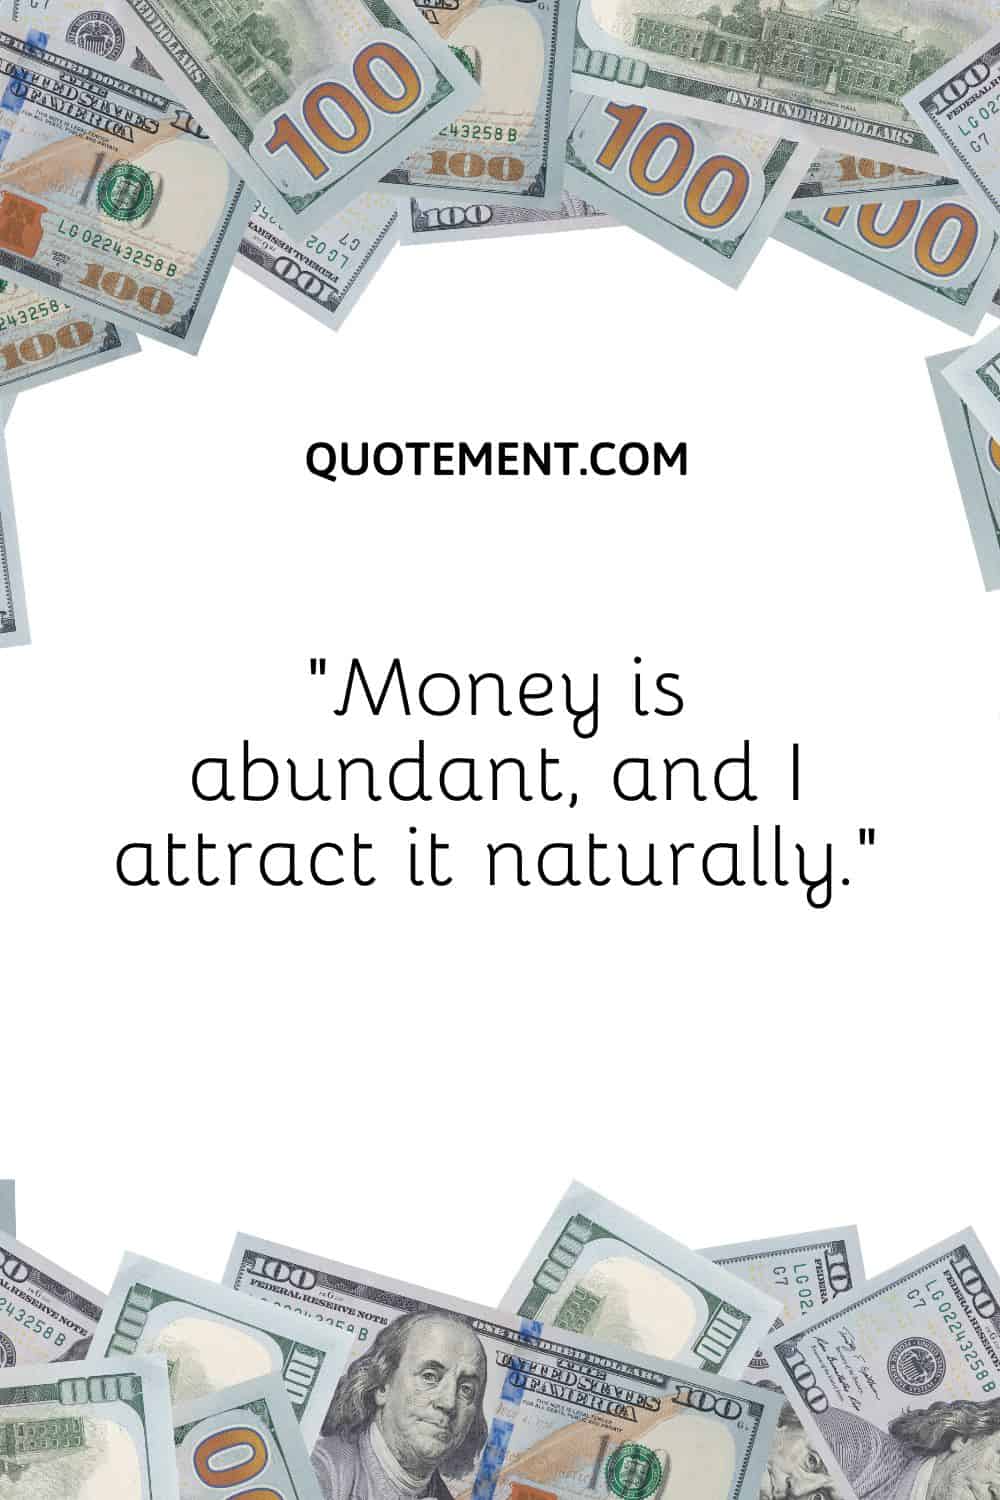 “Money is abundant, and I attract it naturally.”